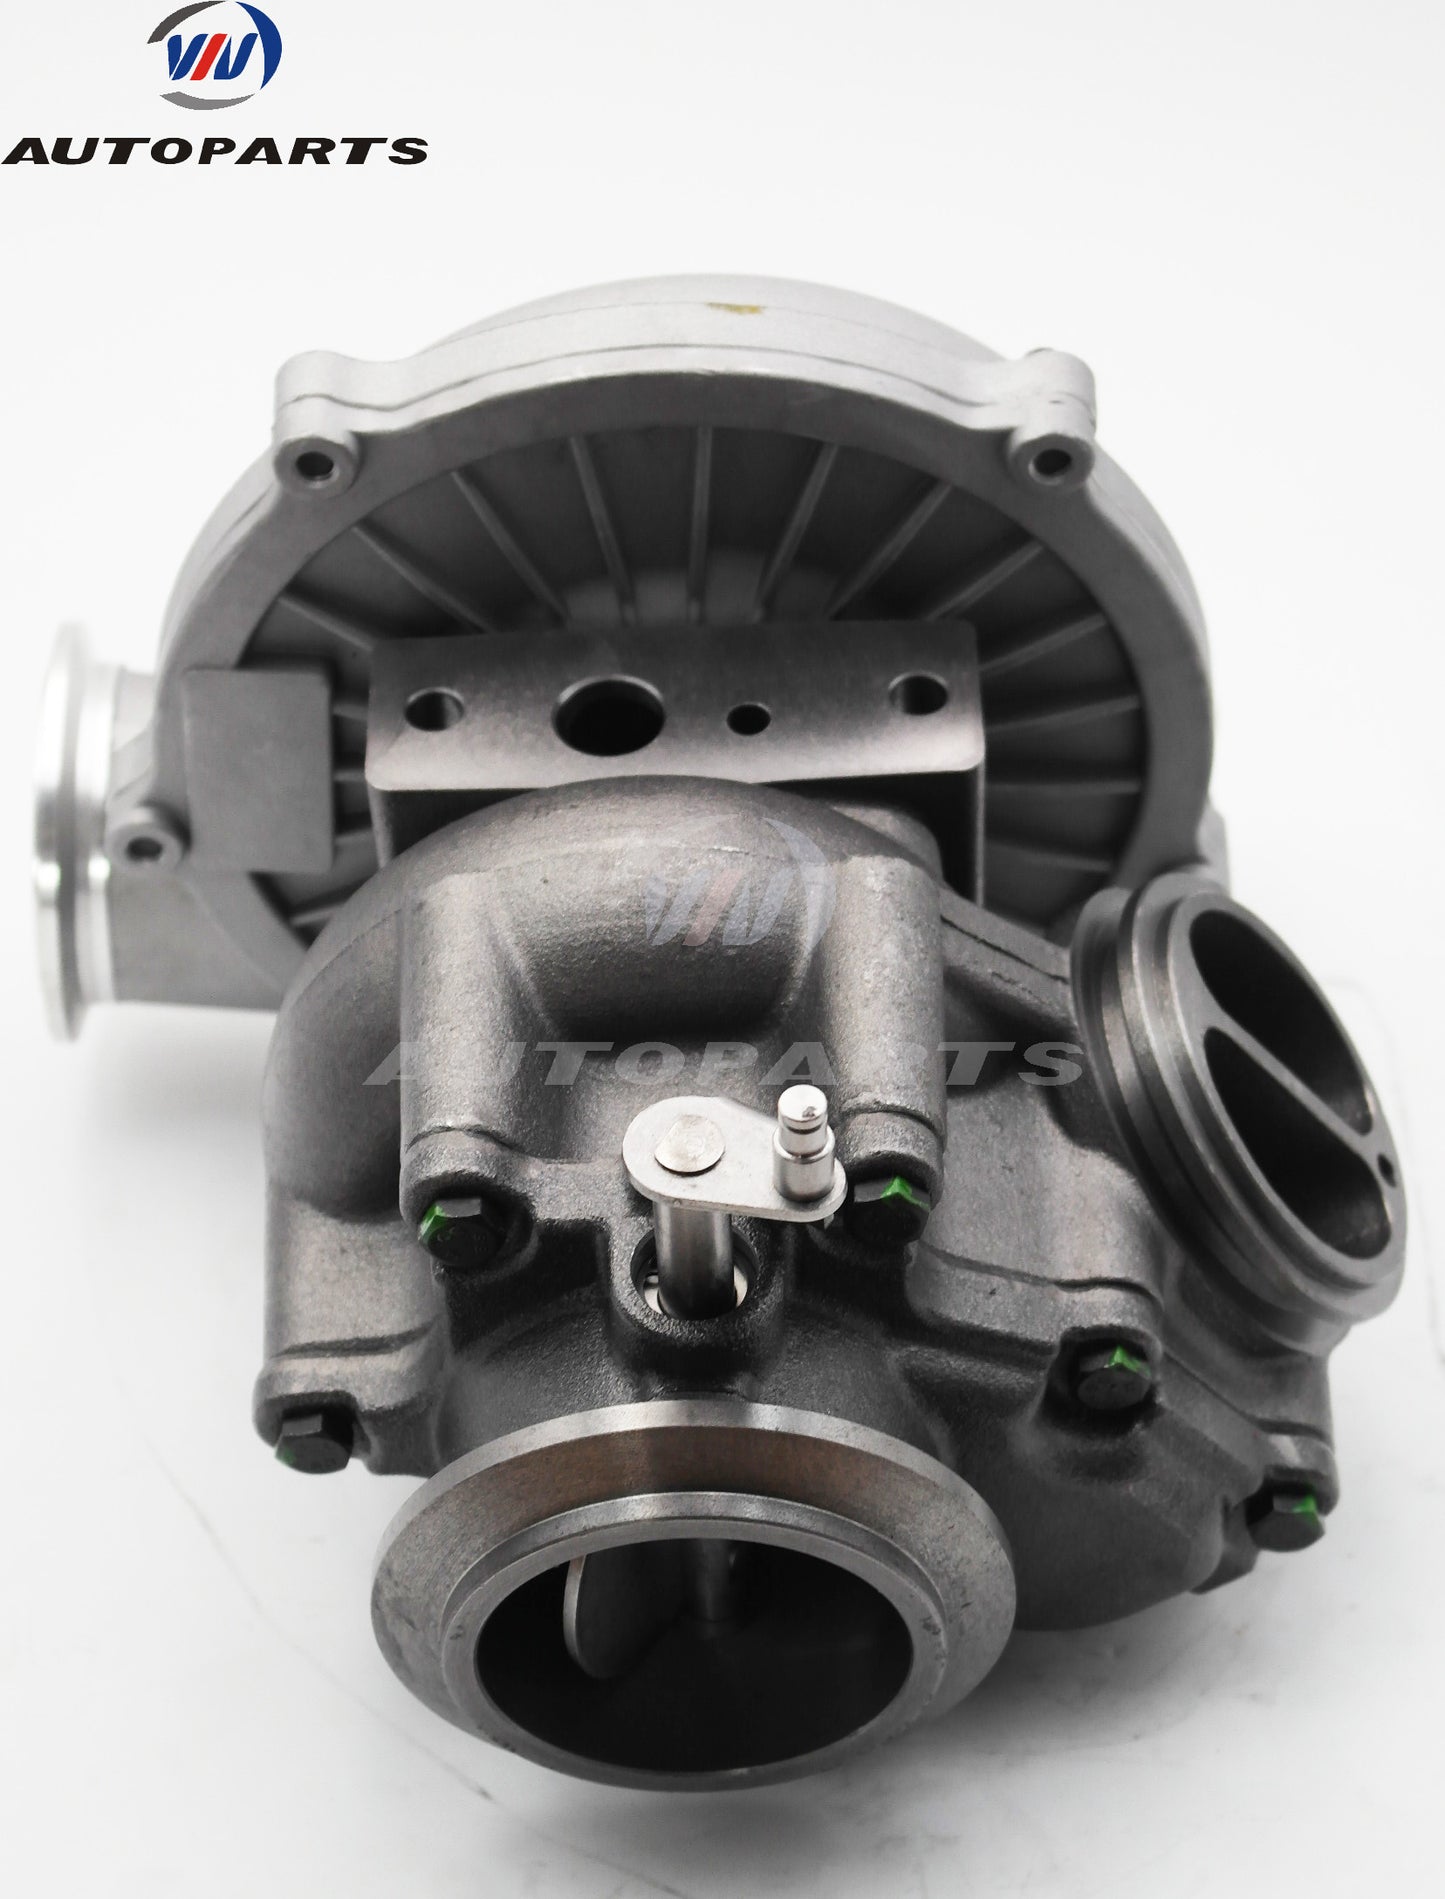 Upgraded GTP38R Turbo 739619-5004S with 4" Air inlet A/R 1.00 Ball Bearing & Billet Turbocharger 739619-5004S for FORD F-series F-250 F-350 Power stroke 7.3L Diesel Engine